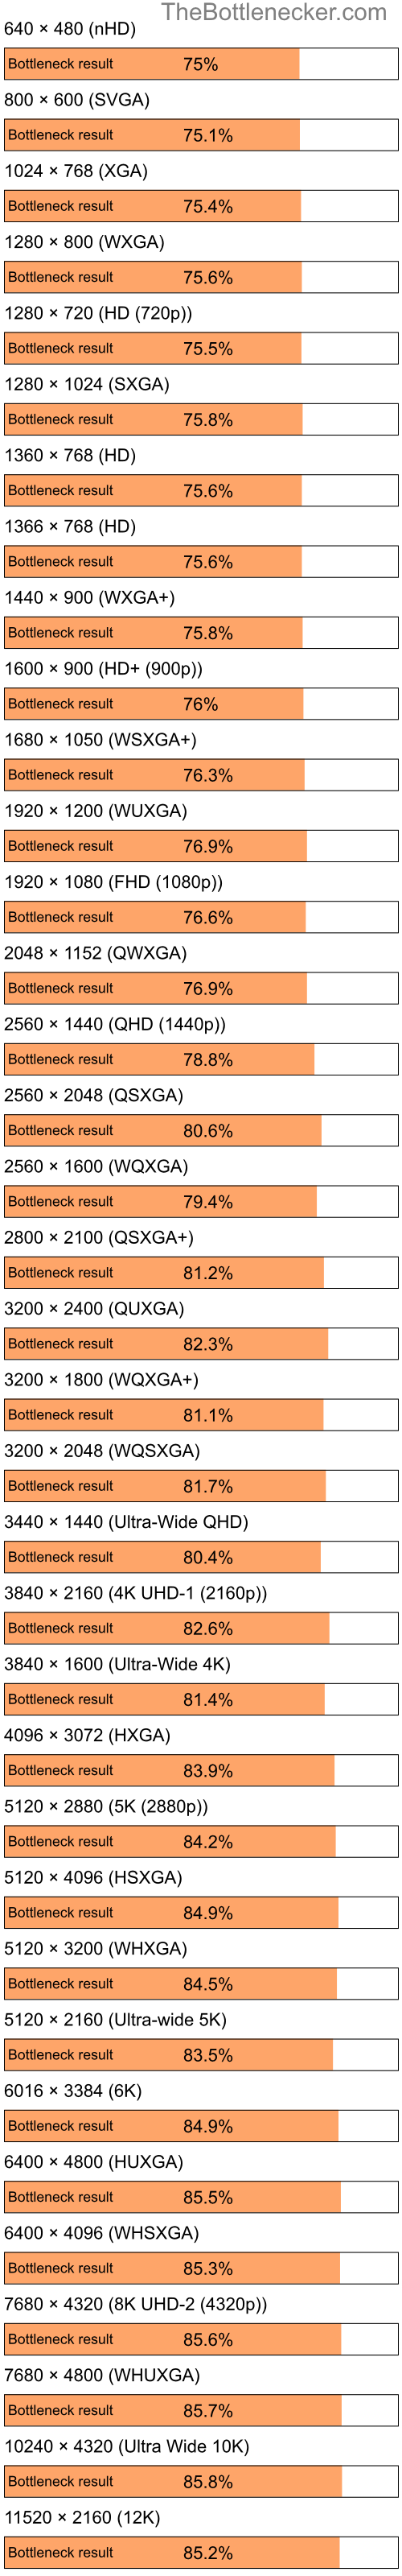 Bottleneck results by resolution for Intel Atom Z520 and NVIDIA Quadro FX 550 in Graphic Card Intense Tasks